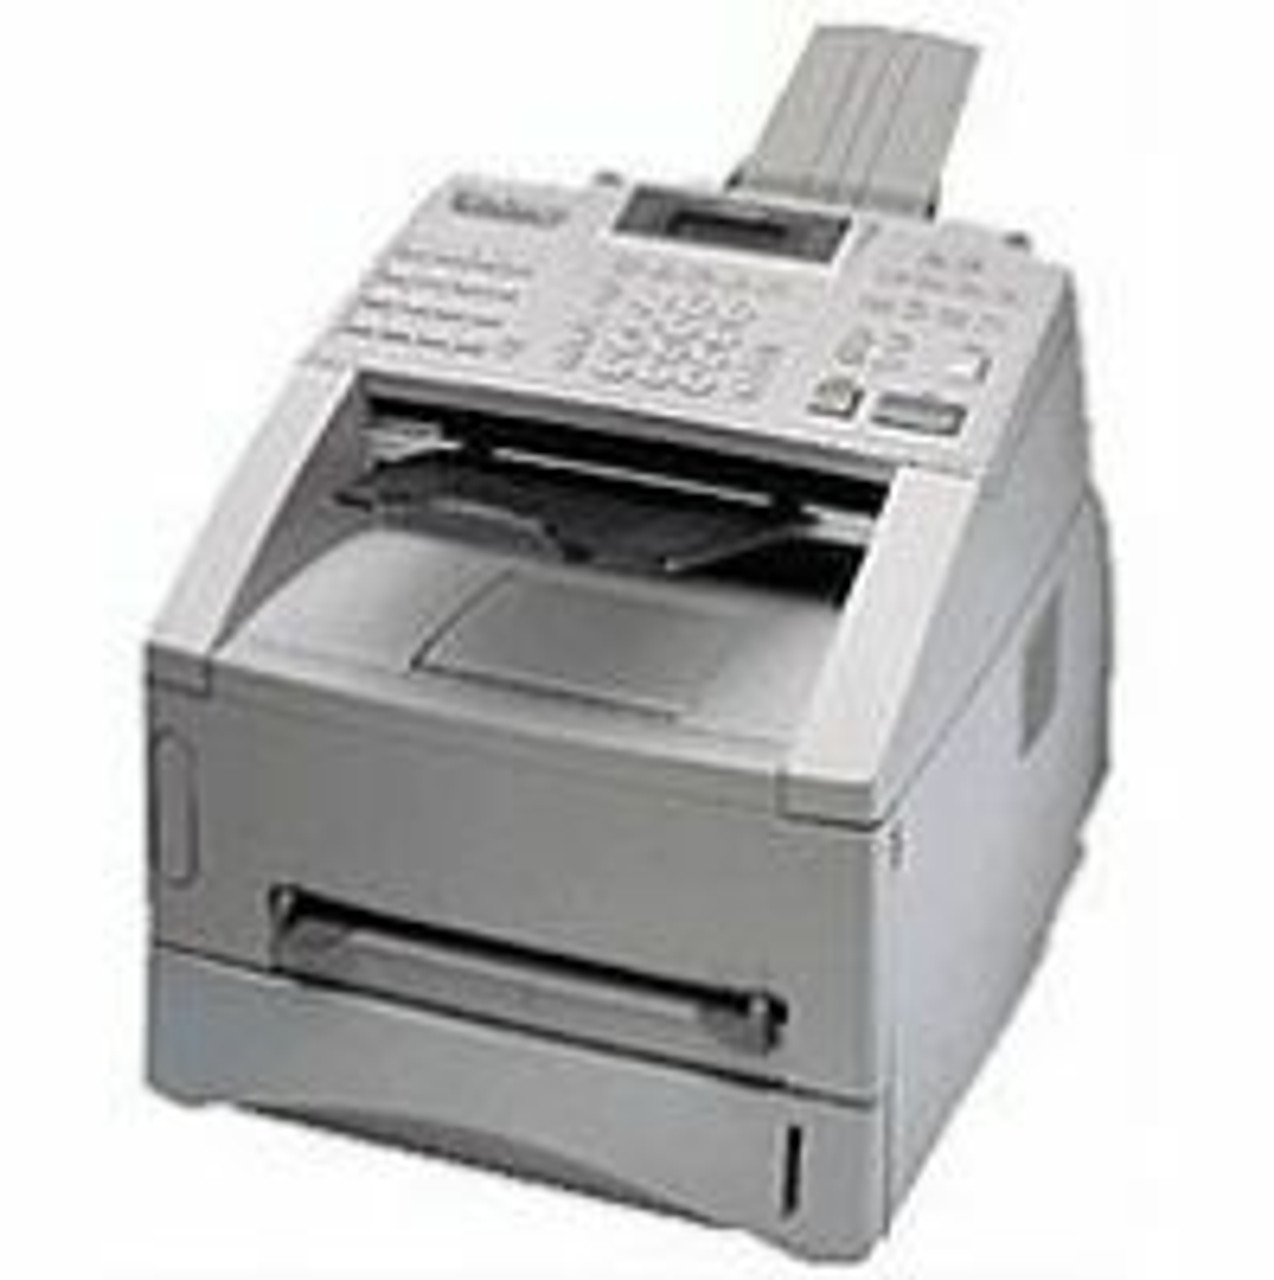 Brother Fax-8750p